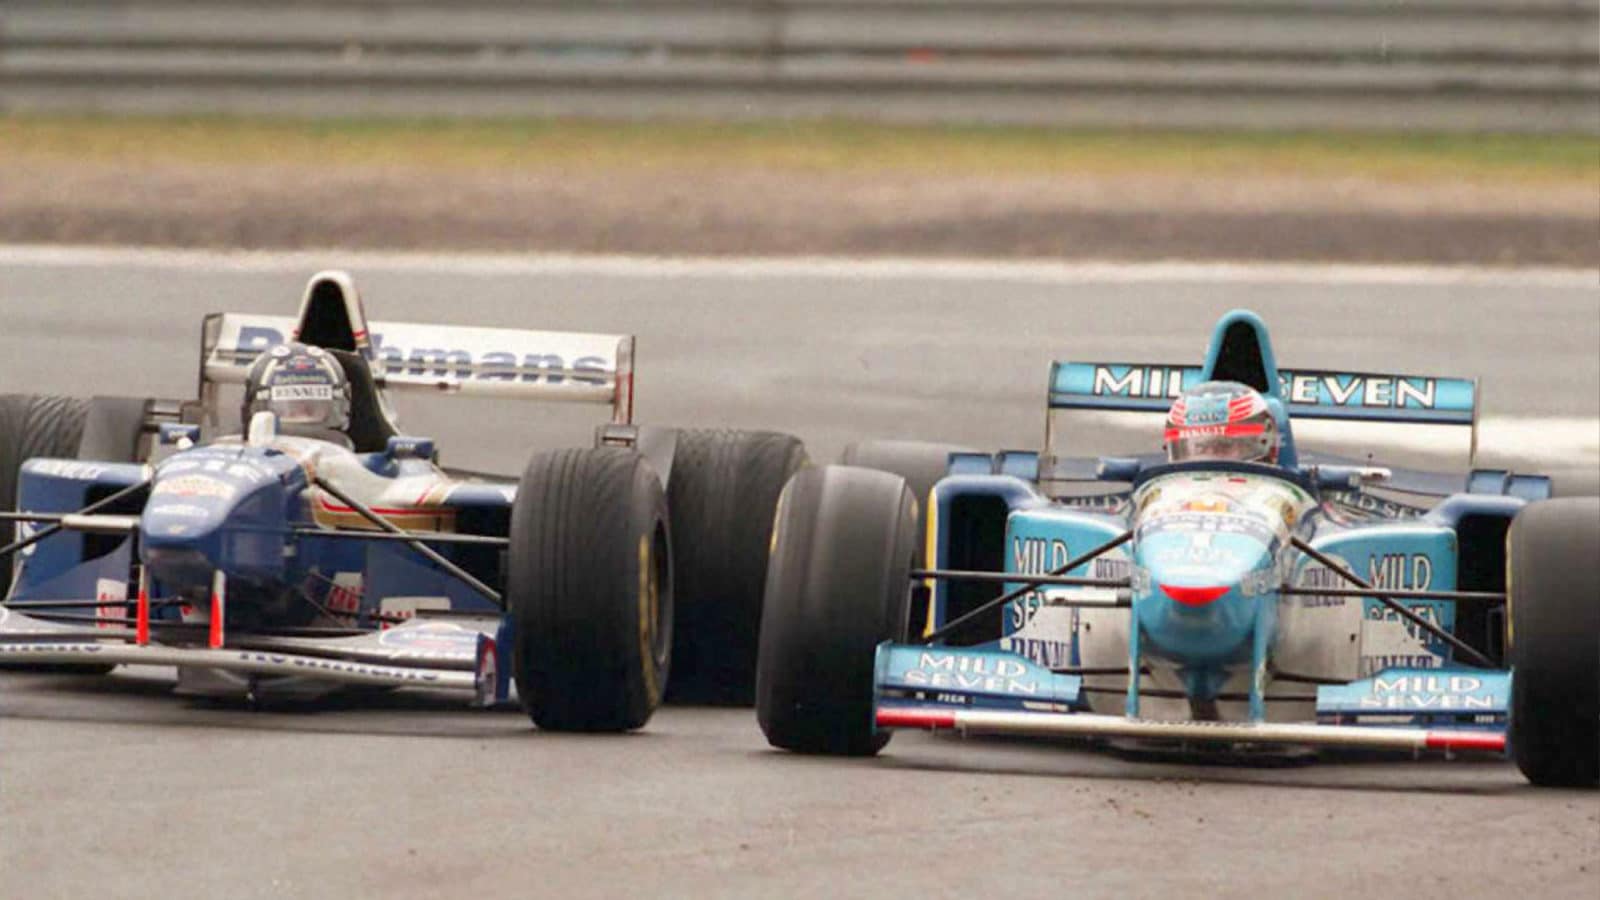 Damon Hill and Michael Schumacher side by side in the 1995 Belgian Grand Prix